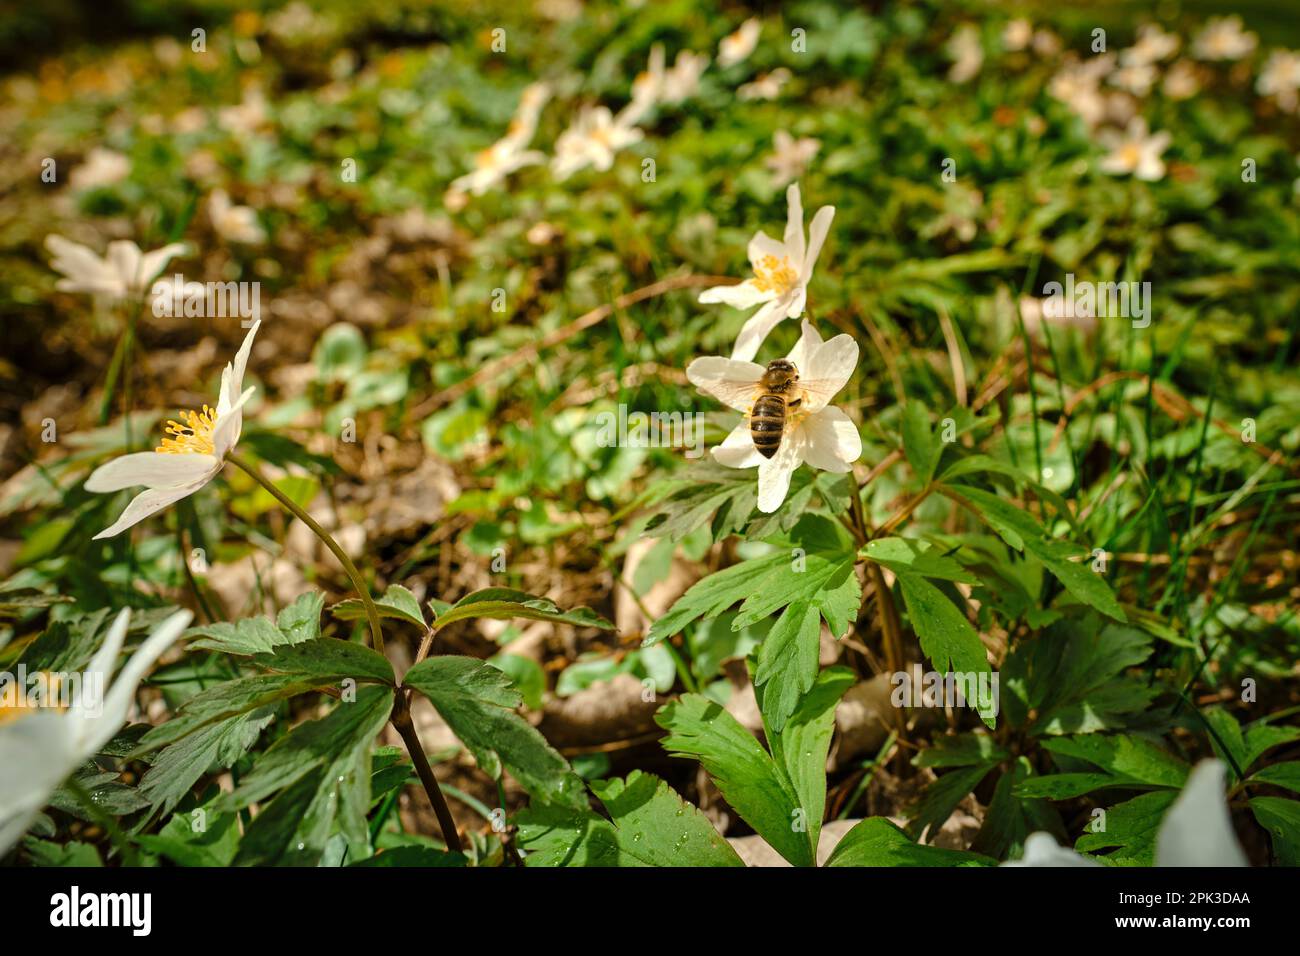 Wild bee pollinating a white-yellow wood anemone early-spring windflower in a green garden, park or forest on a sunny day Stock Photo